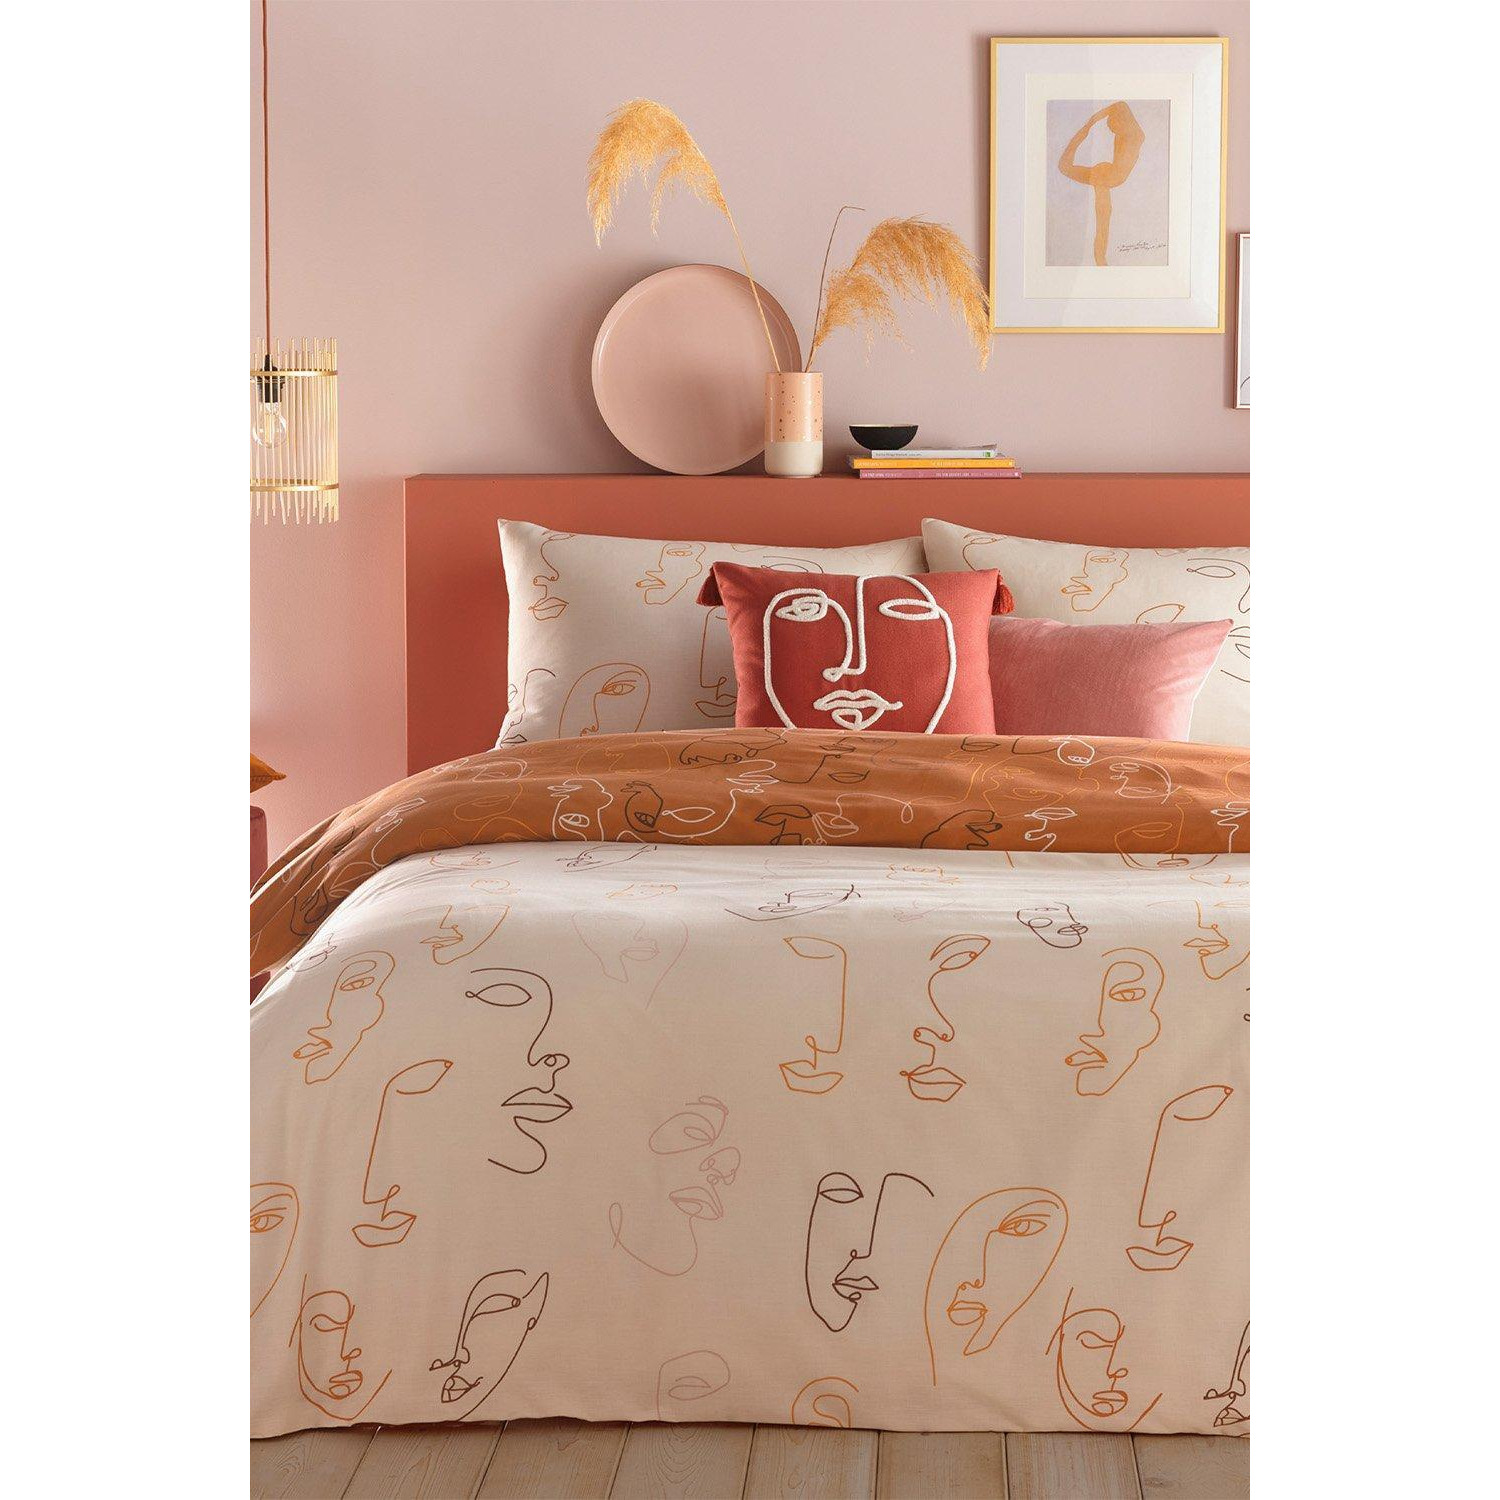 Kind Abstract Faces Reversible Duvet Cover Set - image 1